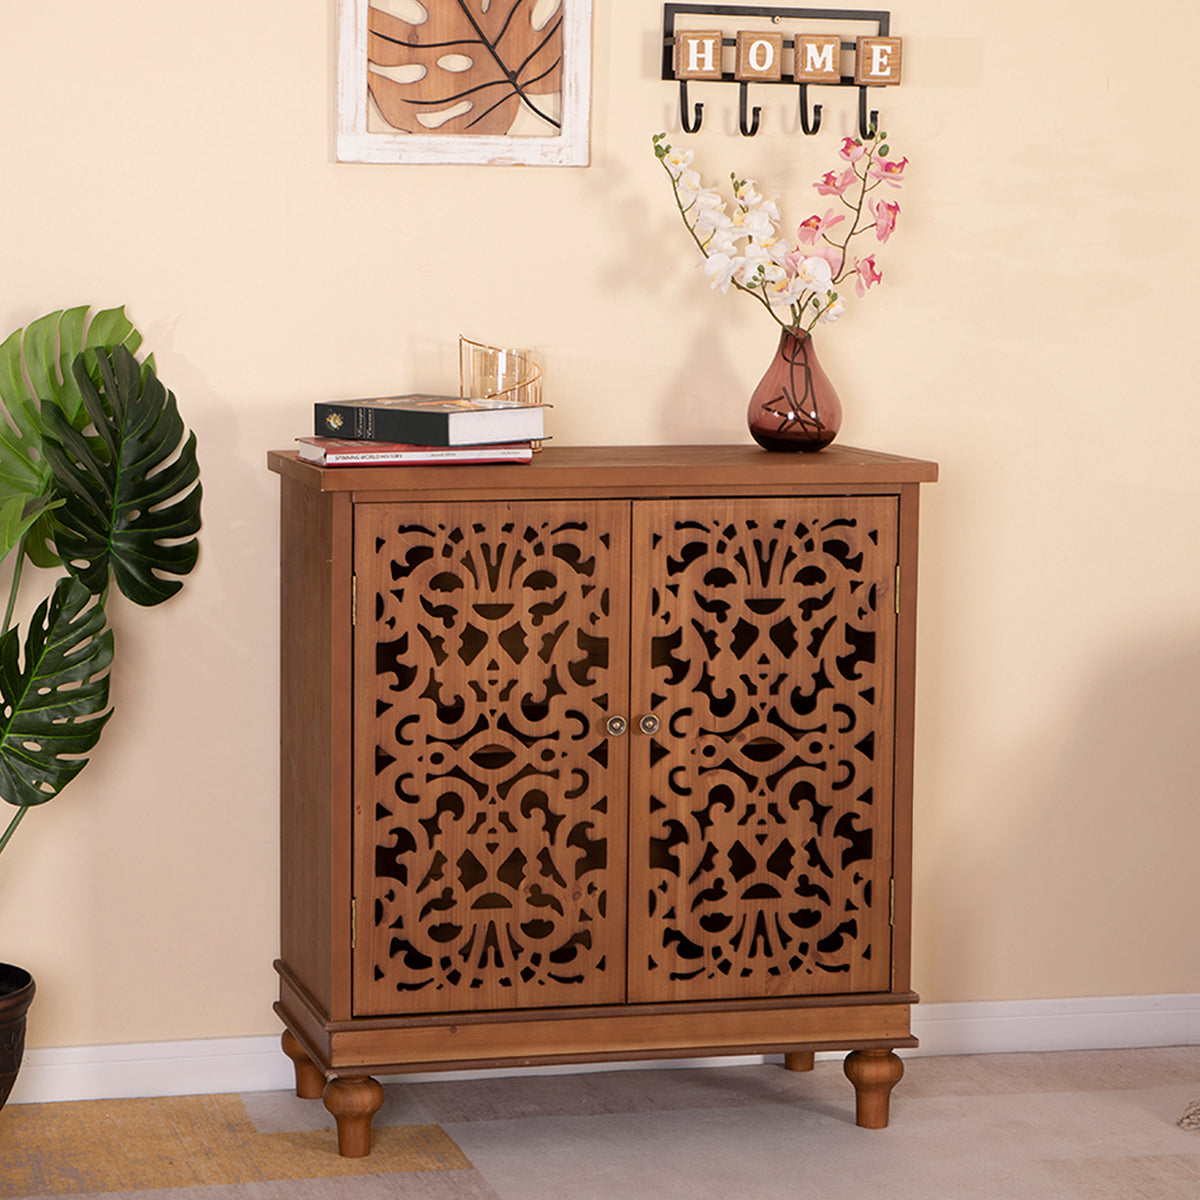 This vintage chic cabinet blends timeless design with sturdy craftsmanship, offering versatile style for any room in your home.